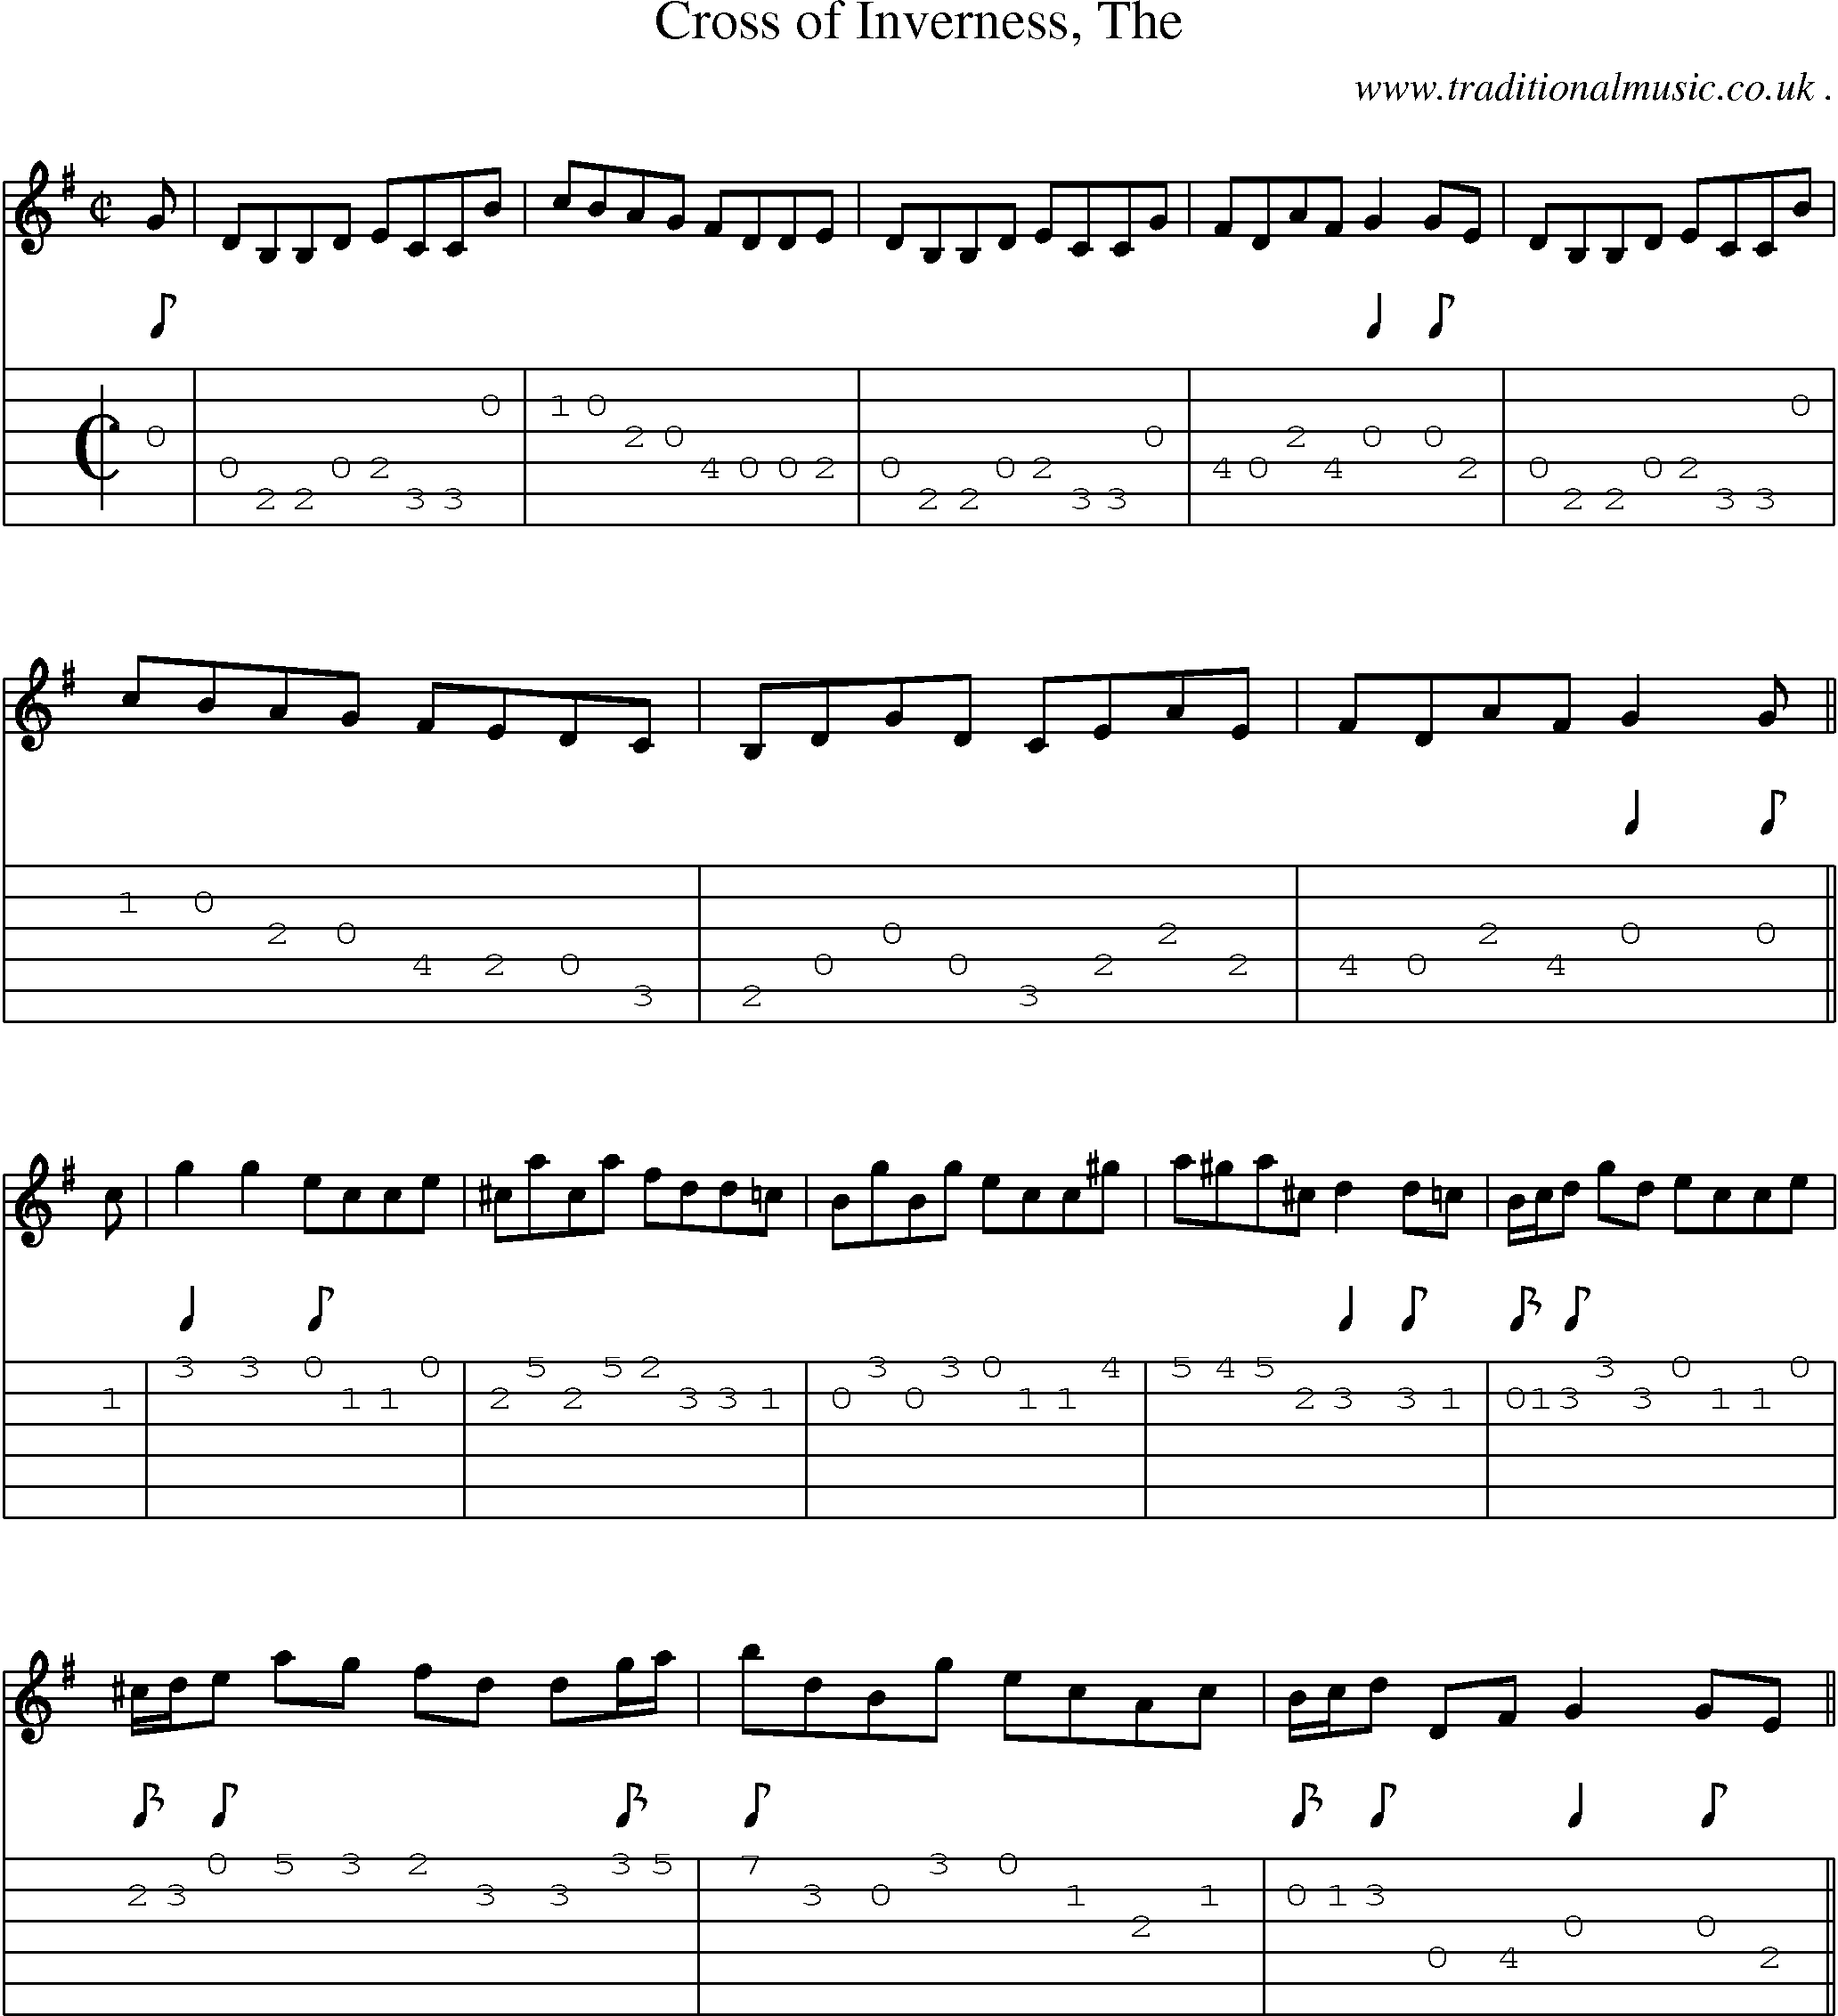 Sheet-music  score, Chords and Guitar Tabs for Cross Of Inverness The